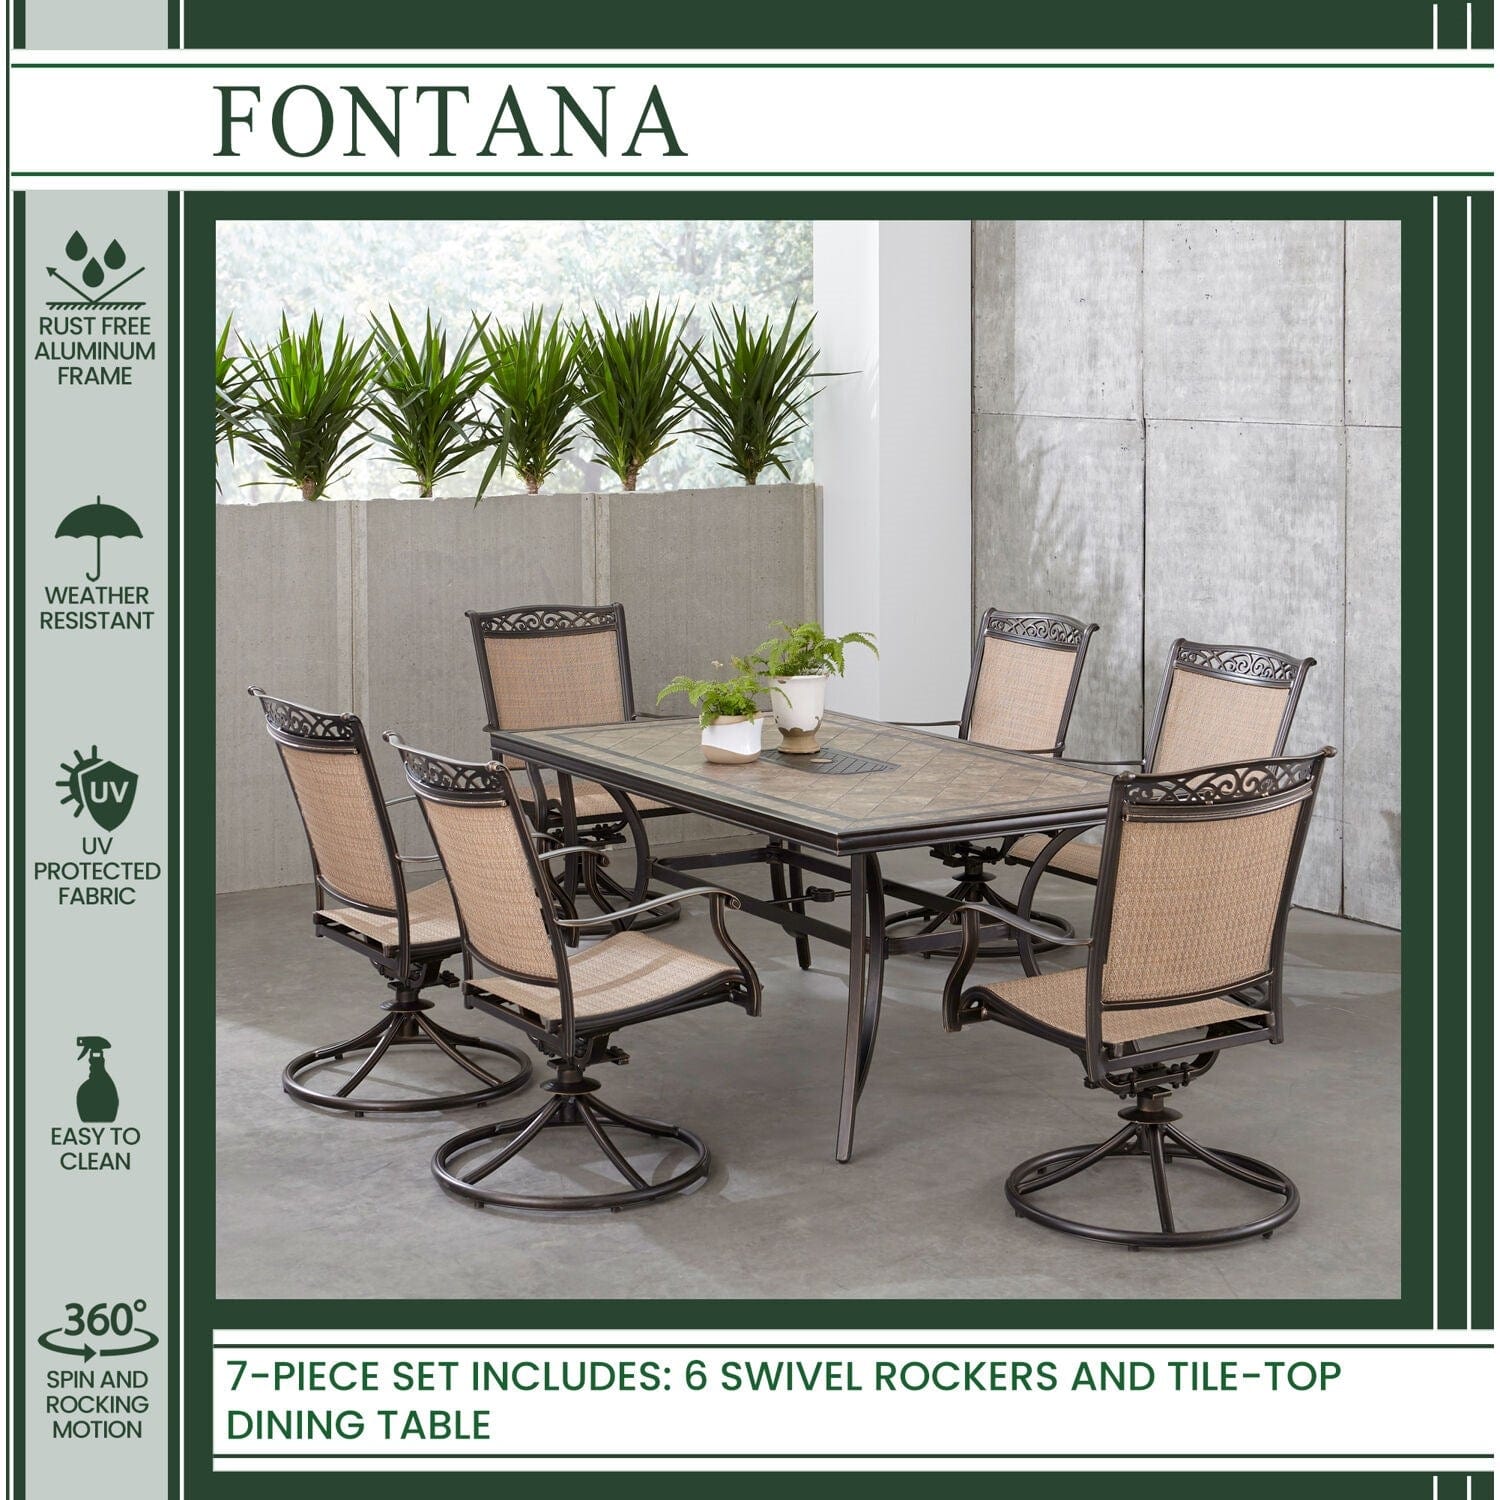 Hanover Outdoor Dining Set Hanover - Fontana 7-Piece Dining Set with Six Swivel Rockers and a Large Tile-Top Dining Table | FNTDN7PCSWTN